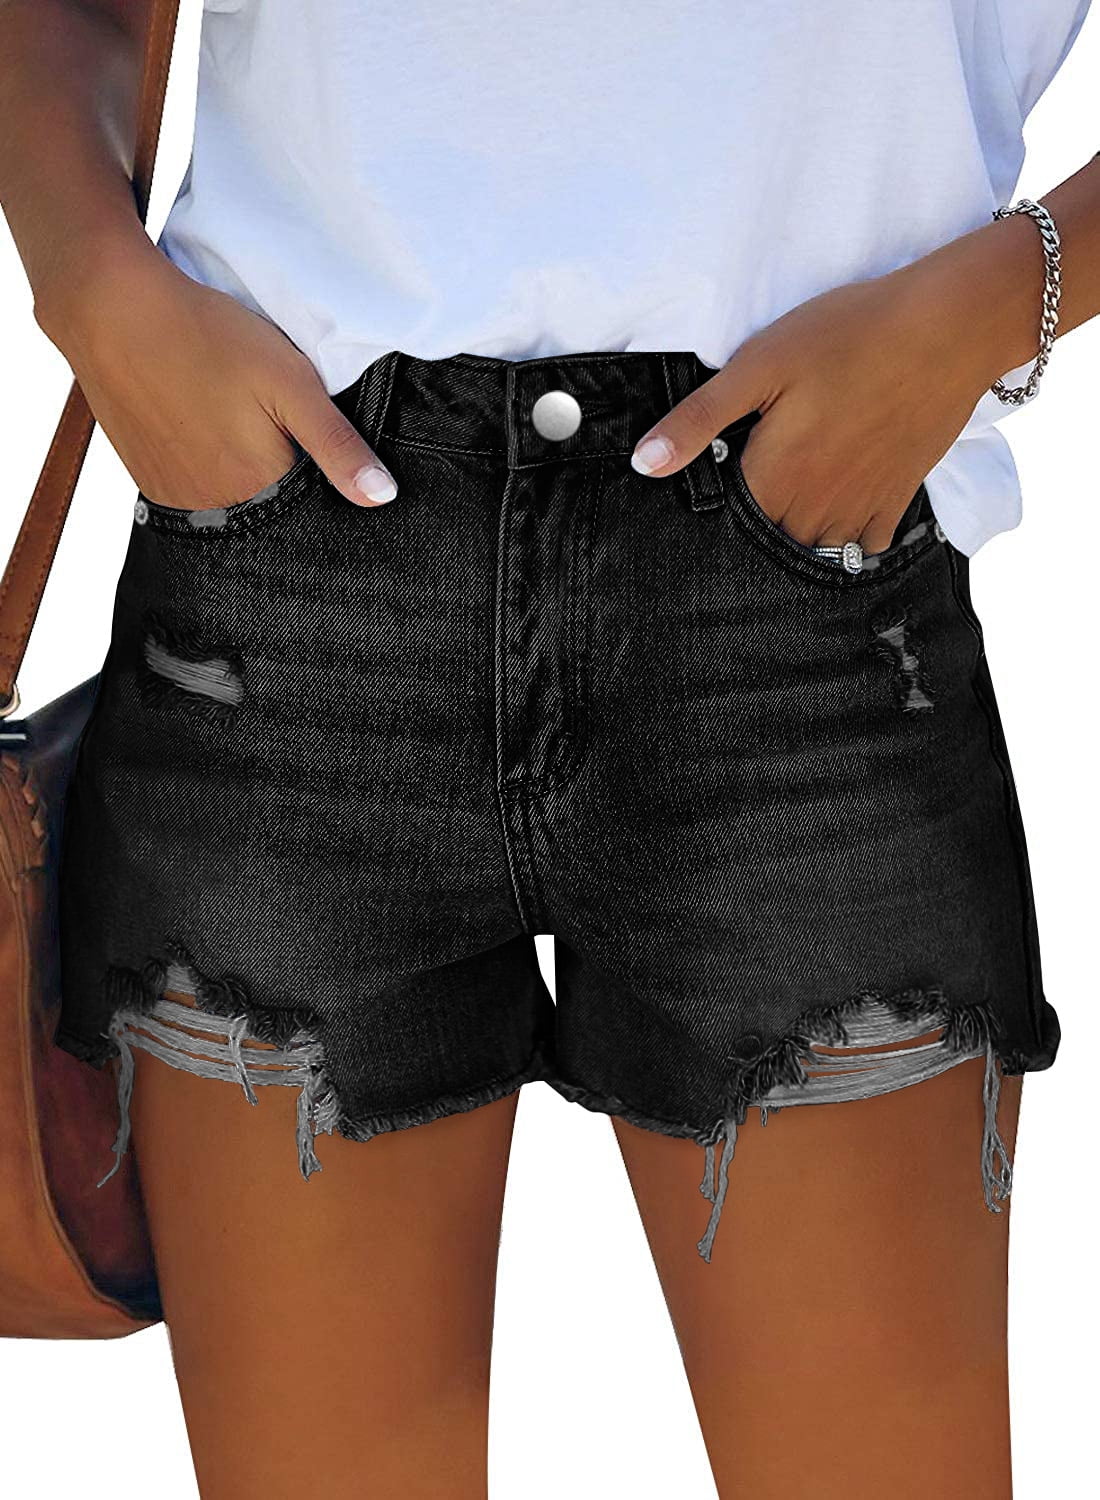 Jean Women plus Women Casual High Waisted Denim Shorts Frayed Primordial  Hem Ripped Jeans Shorts Pant Size 12 